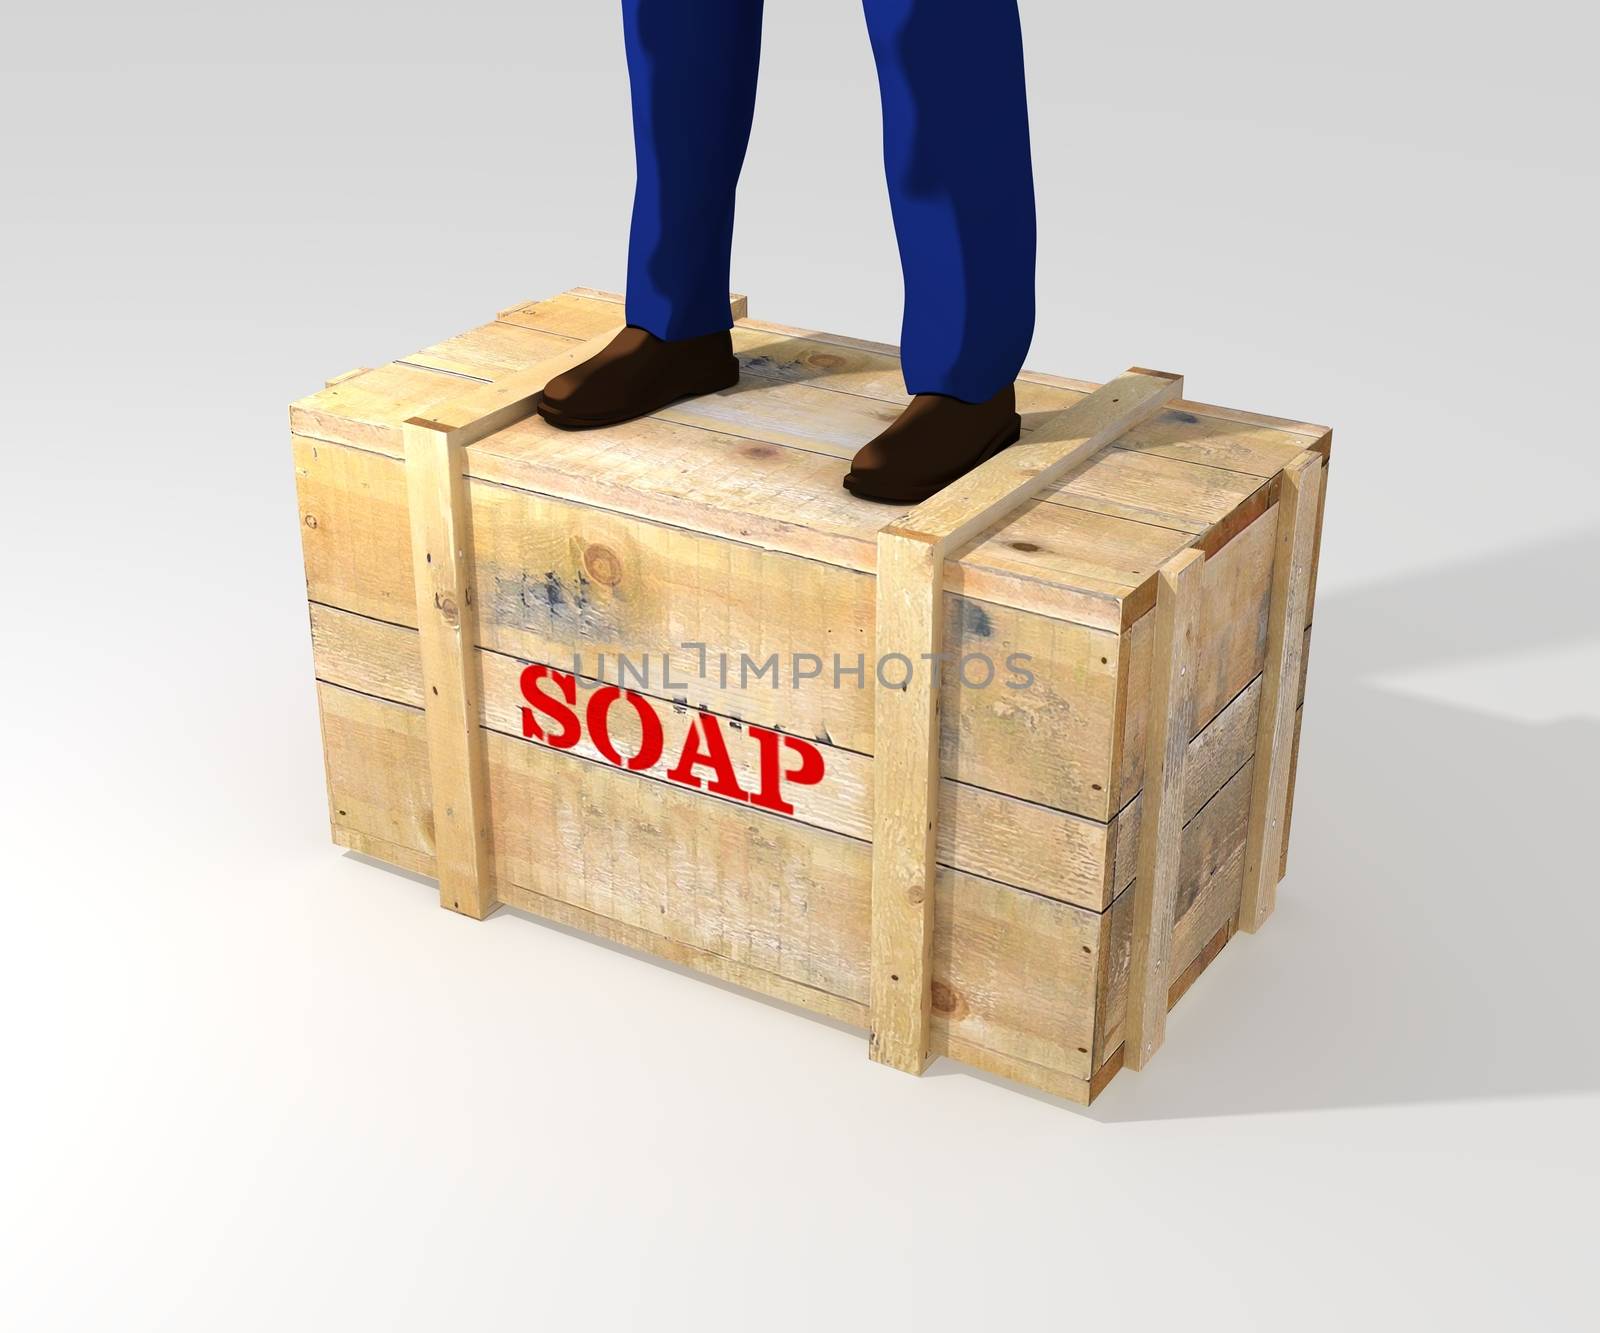 Illustration of a person standing on a soapbox